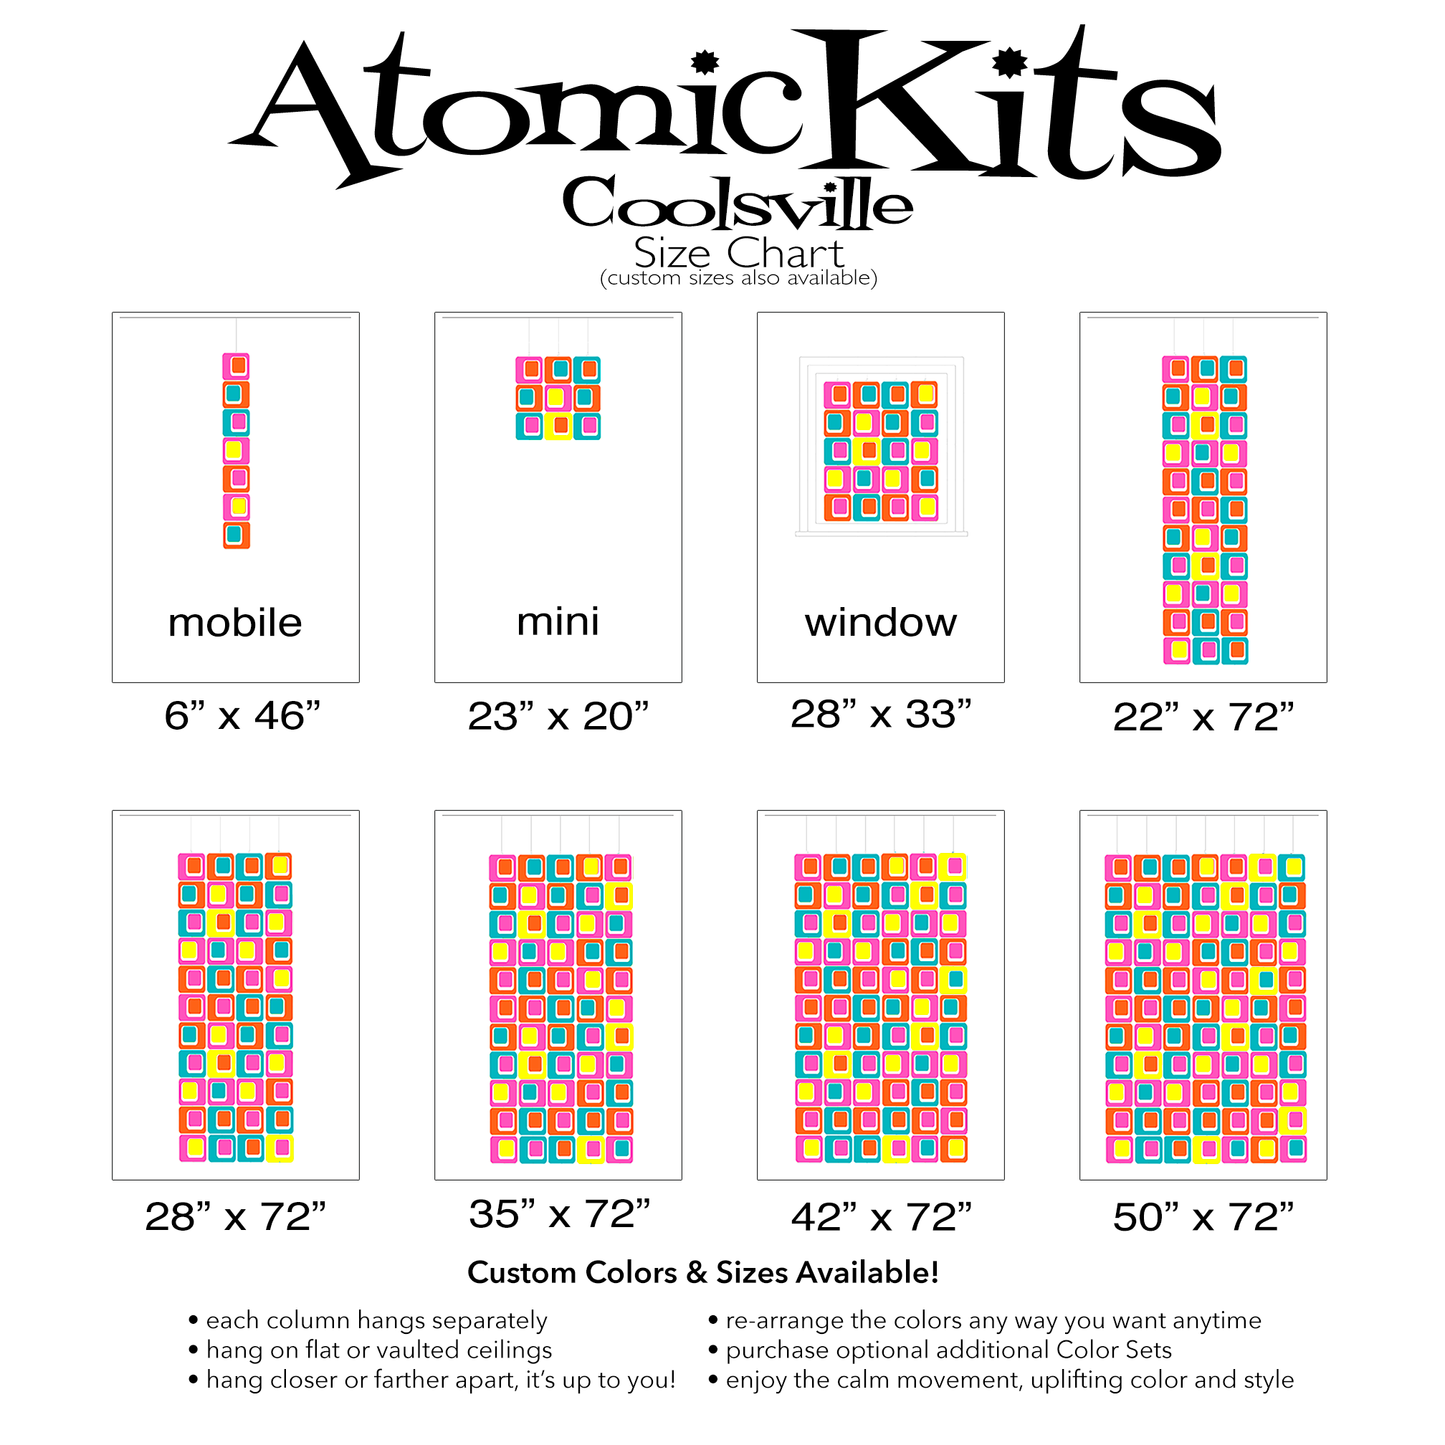 Size Chart for Coolsville in Hot Pink, Yellow, Orange, and Aqua Blue Colors for Room Dividers, Curtains, Mobiles, and Wall Art DIY KIT by AtomicMobiles.com